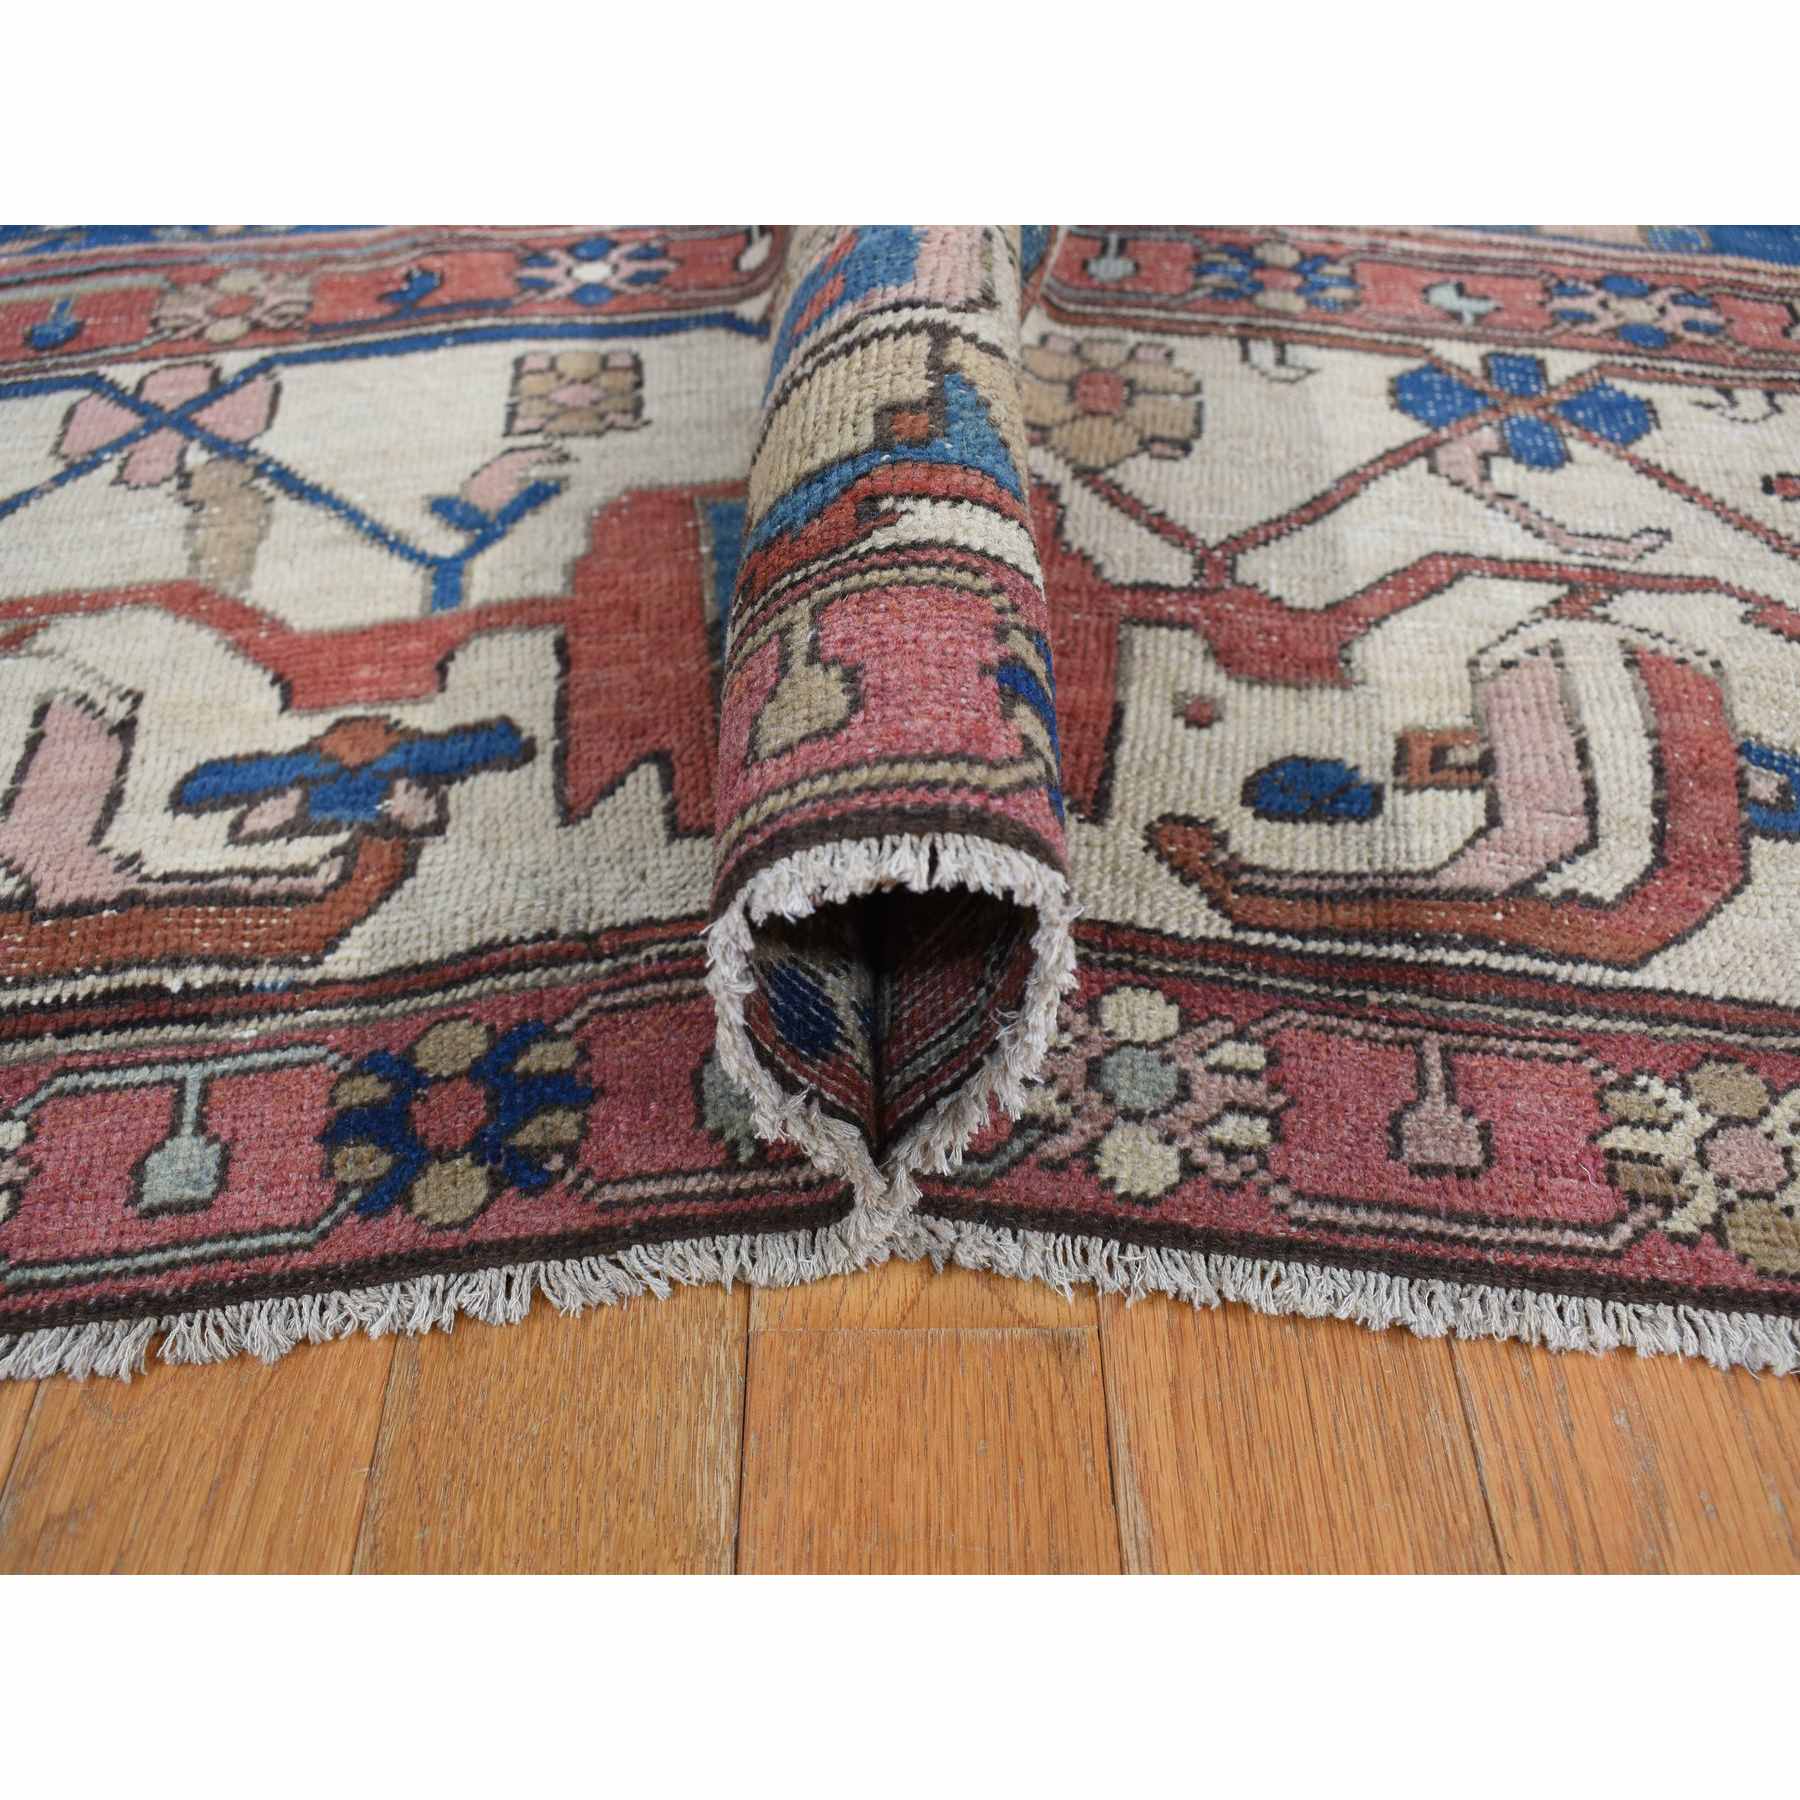 Antique-Hand-Knotted-Rug-390285